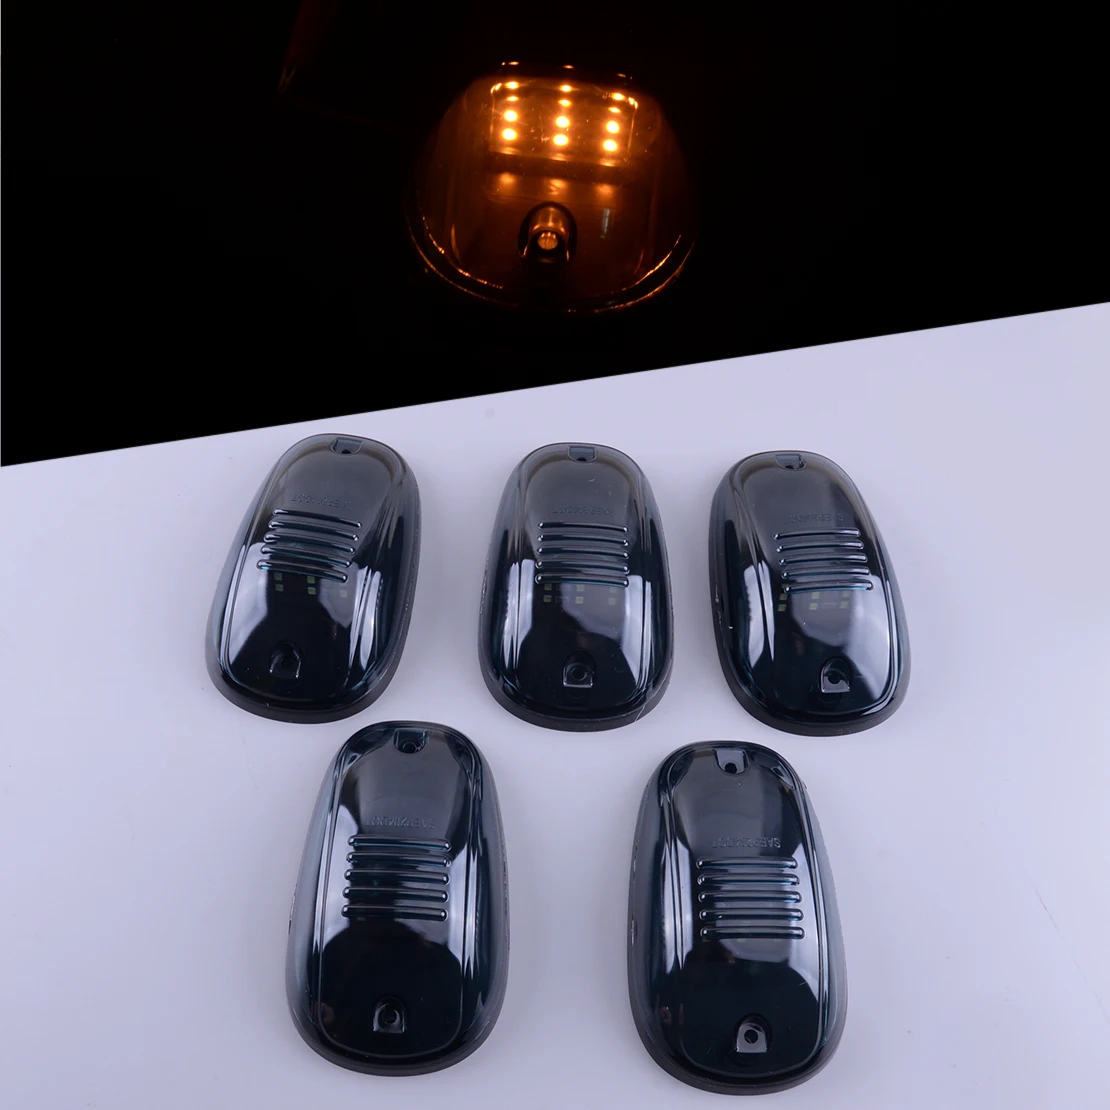 

5Pcs LED Rooftop Cab Running Marker Amber Light DRL 12V-24V Fit for Ford F-Series Jeep 4x4 SUV RV Truck Dodge Ram 1500 2500 3500